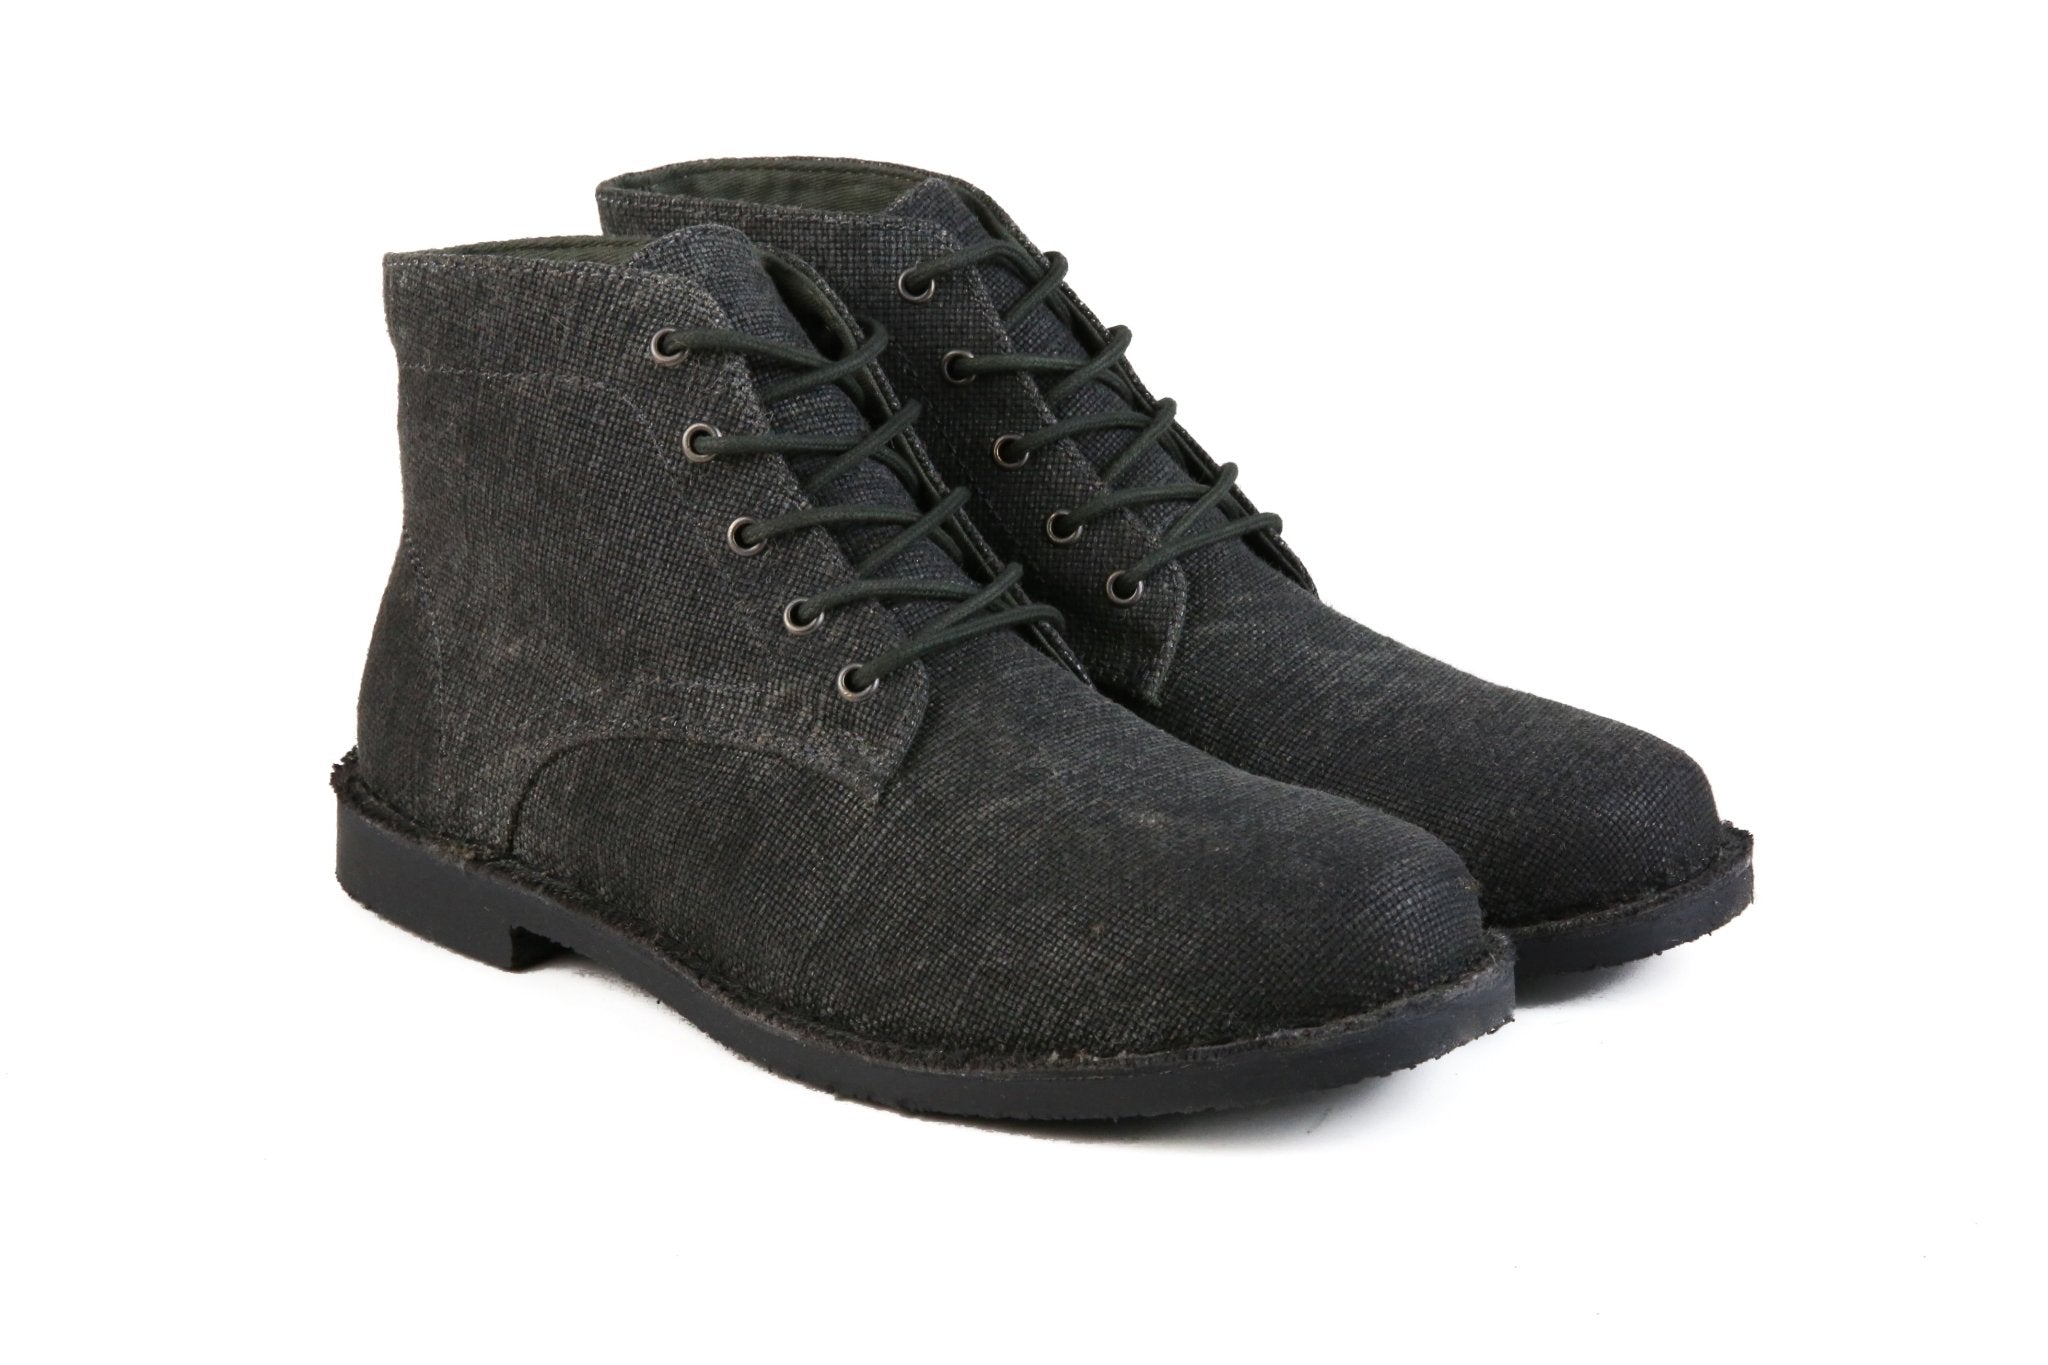 Hound & Hammer The Grover-Vegan | Charcoal Ankle Boots for Men